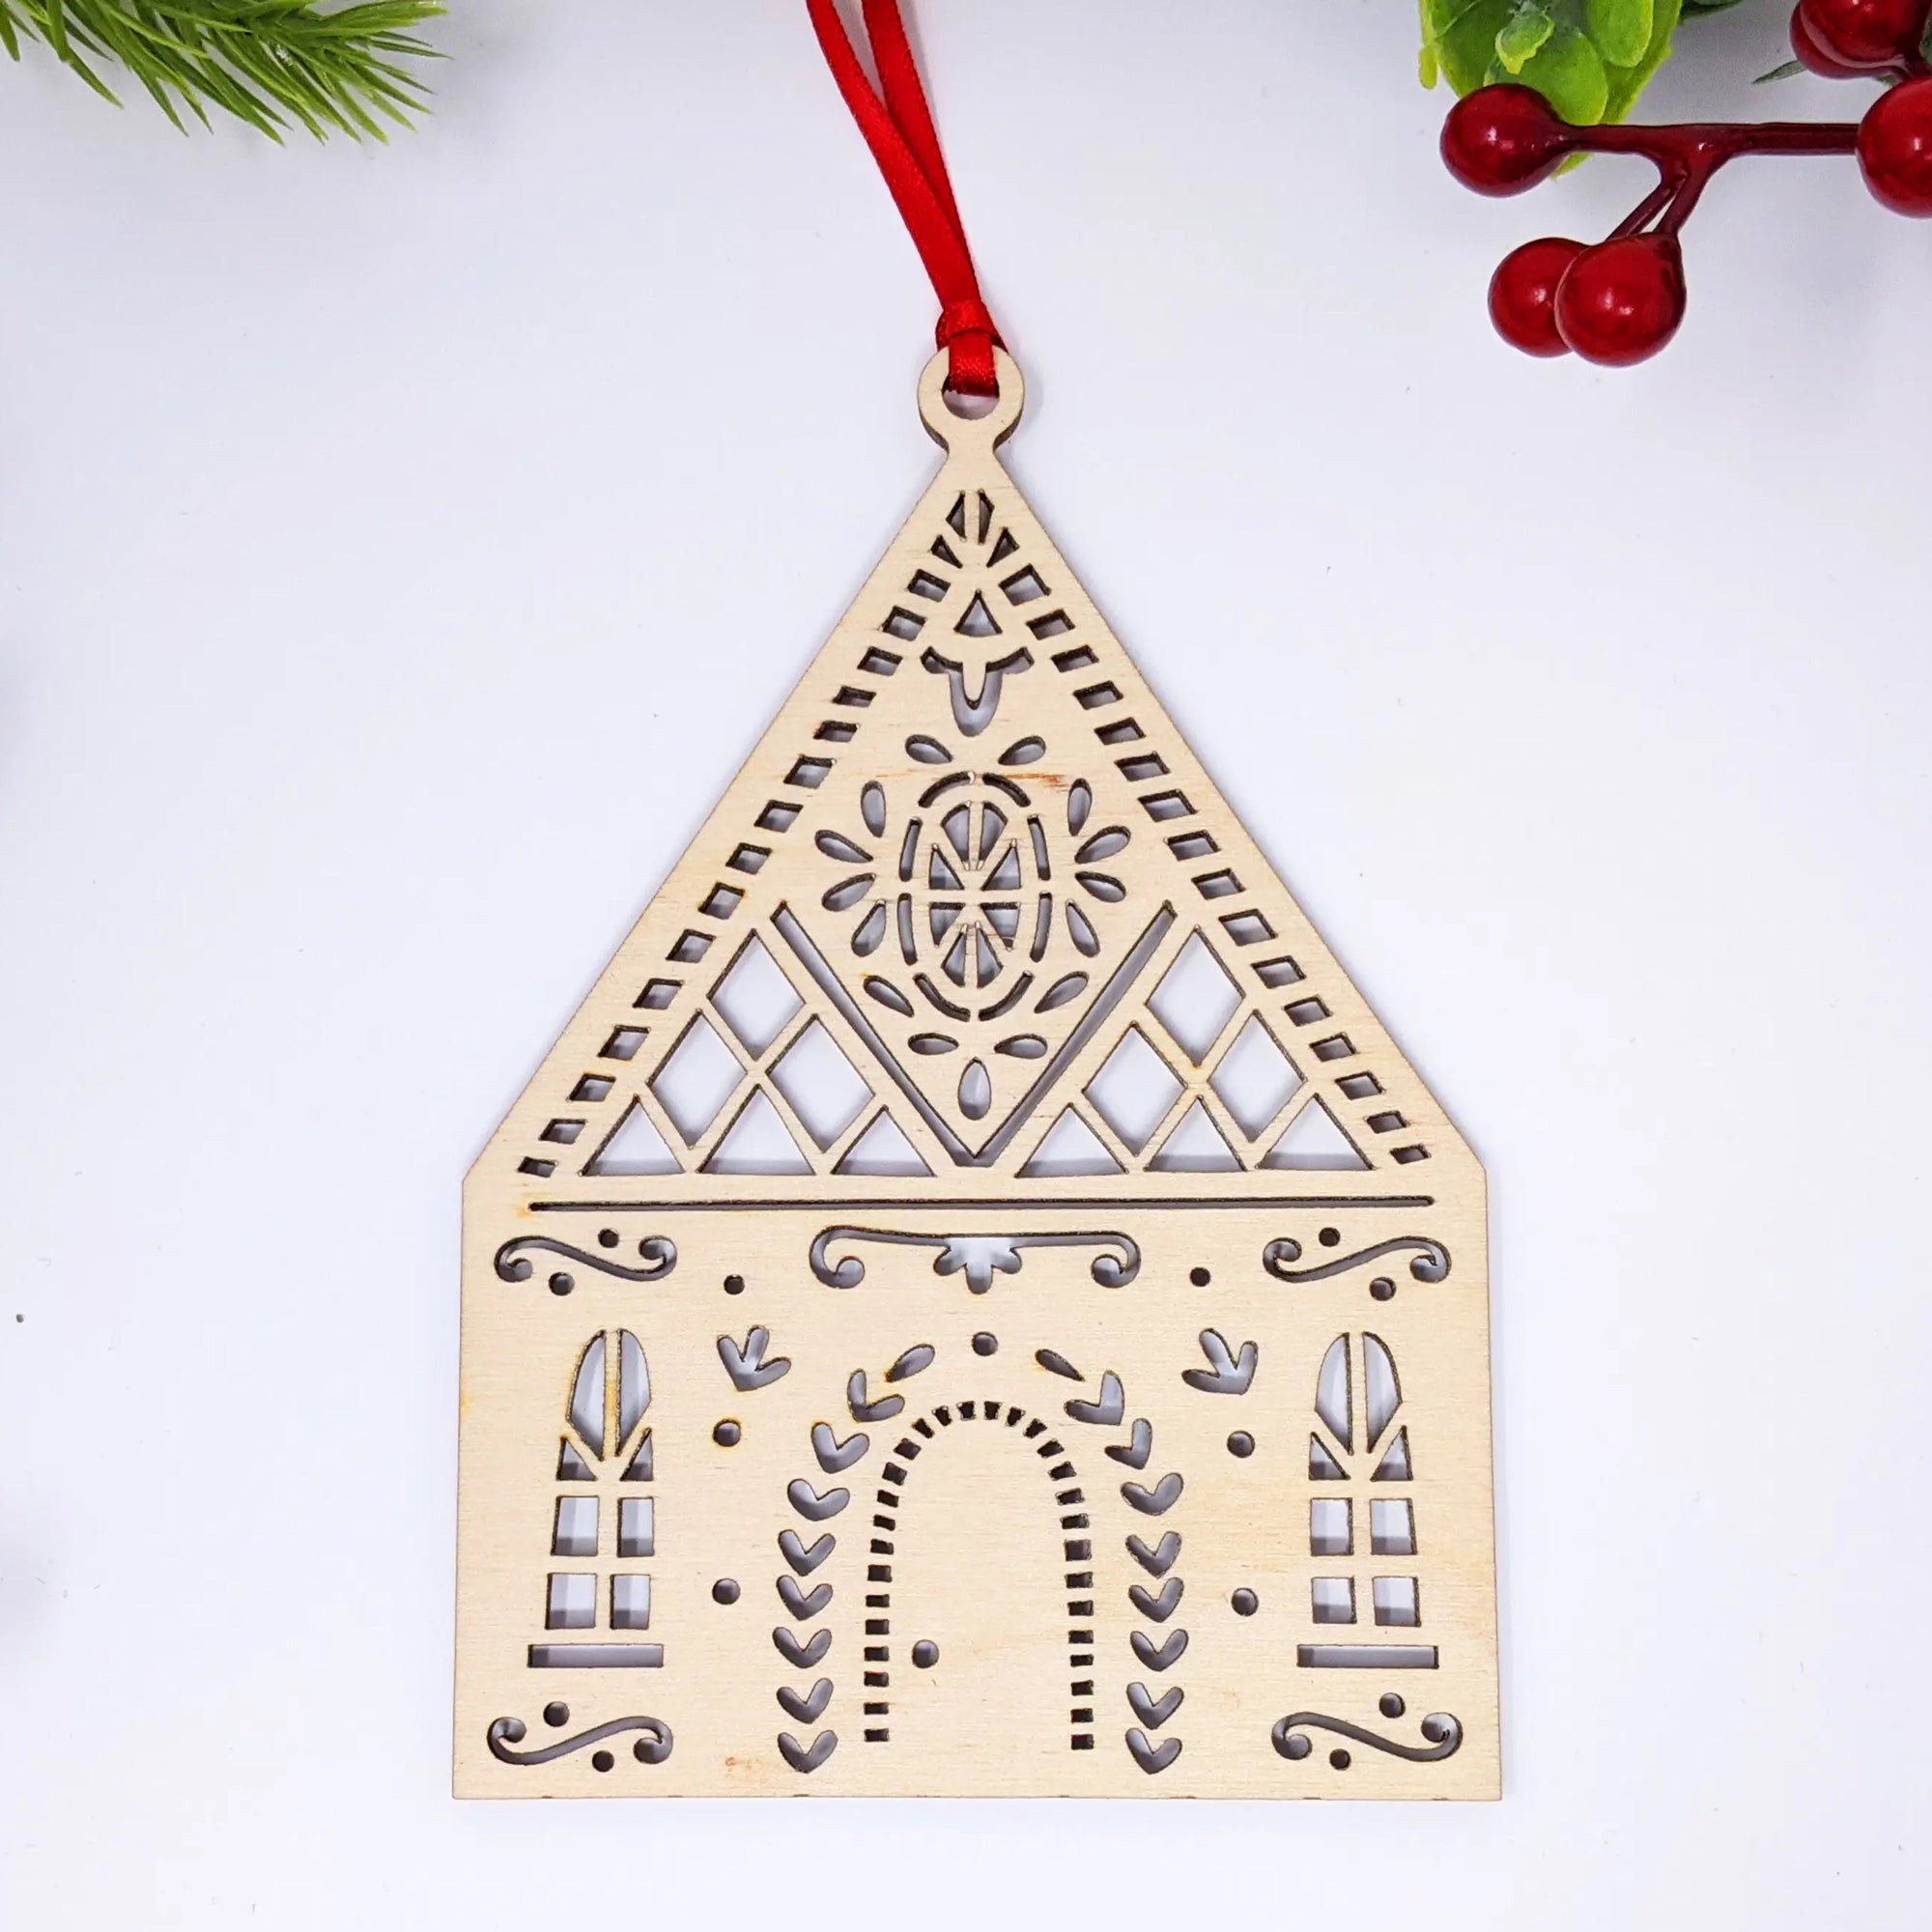 This Tudor Cottage Wood Ornament is handmade in the USA. This little putz house ornament is inspired by Tudor architecture and fairy tale villages nestled throughout Europe. Made in the USA. 5" L x 4" H